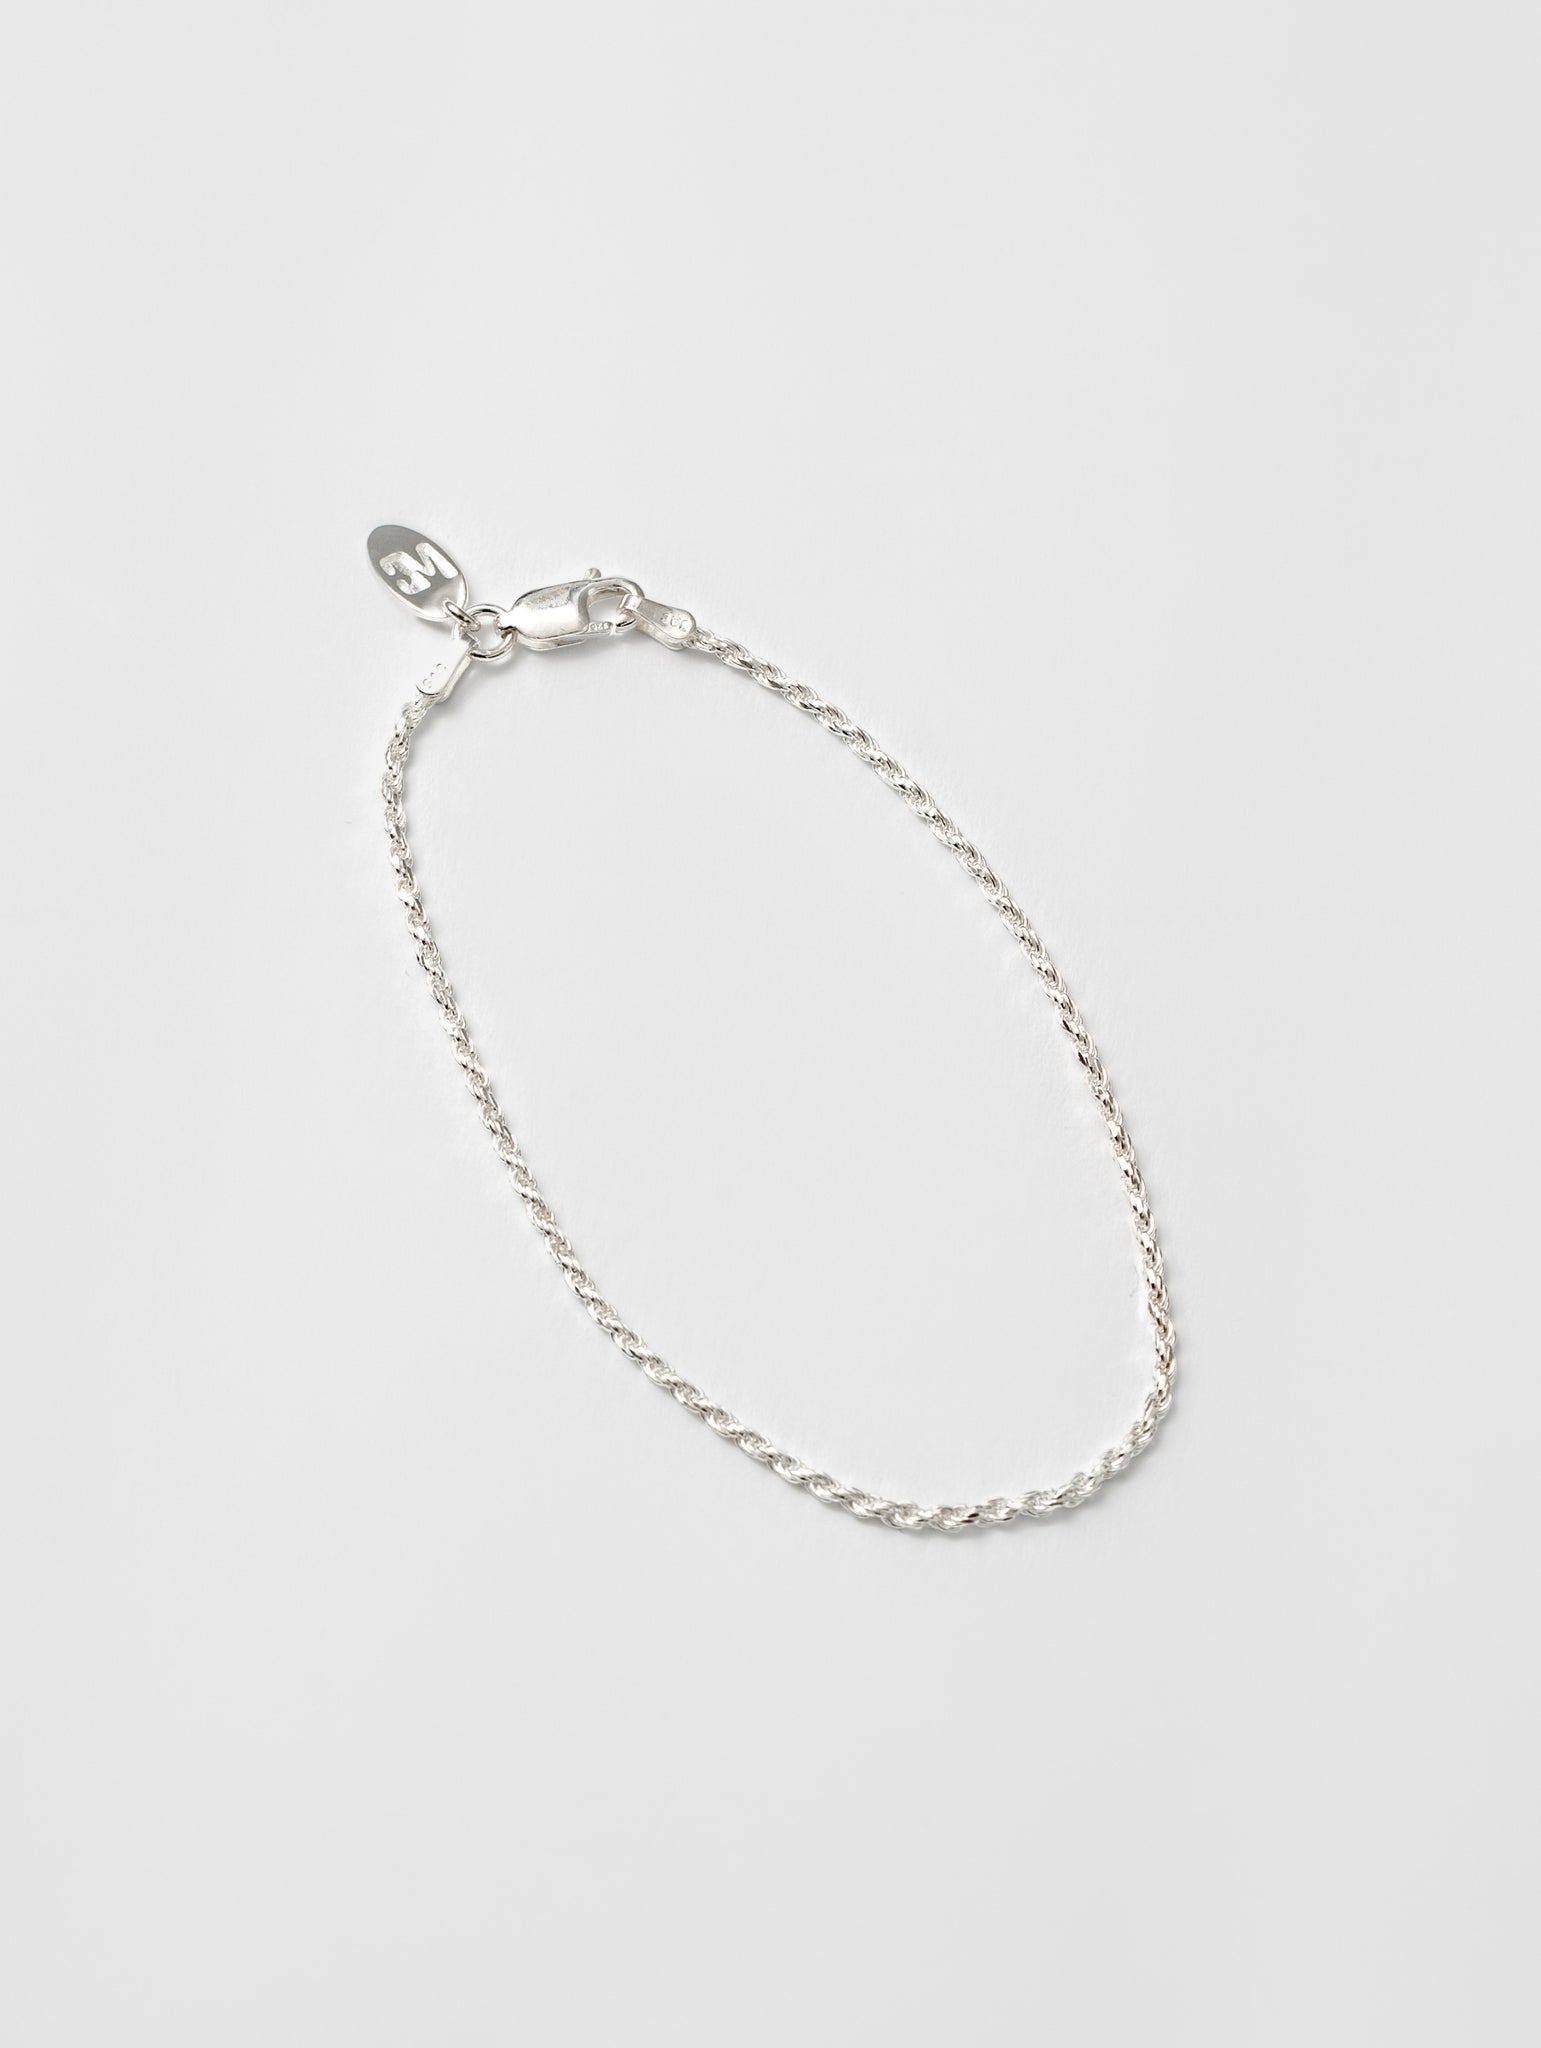 Wolf Circus Rope Chain Bracelet in Sterling Silver | Adele Bracelet in Sterling Silver-Bracelets-wolfcircus.com